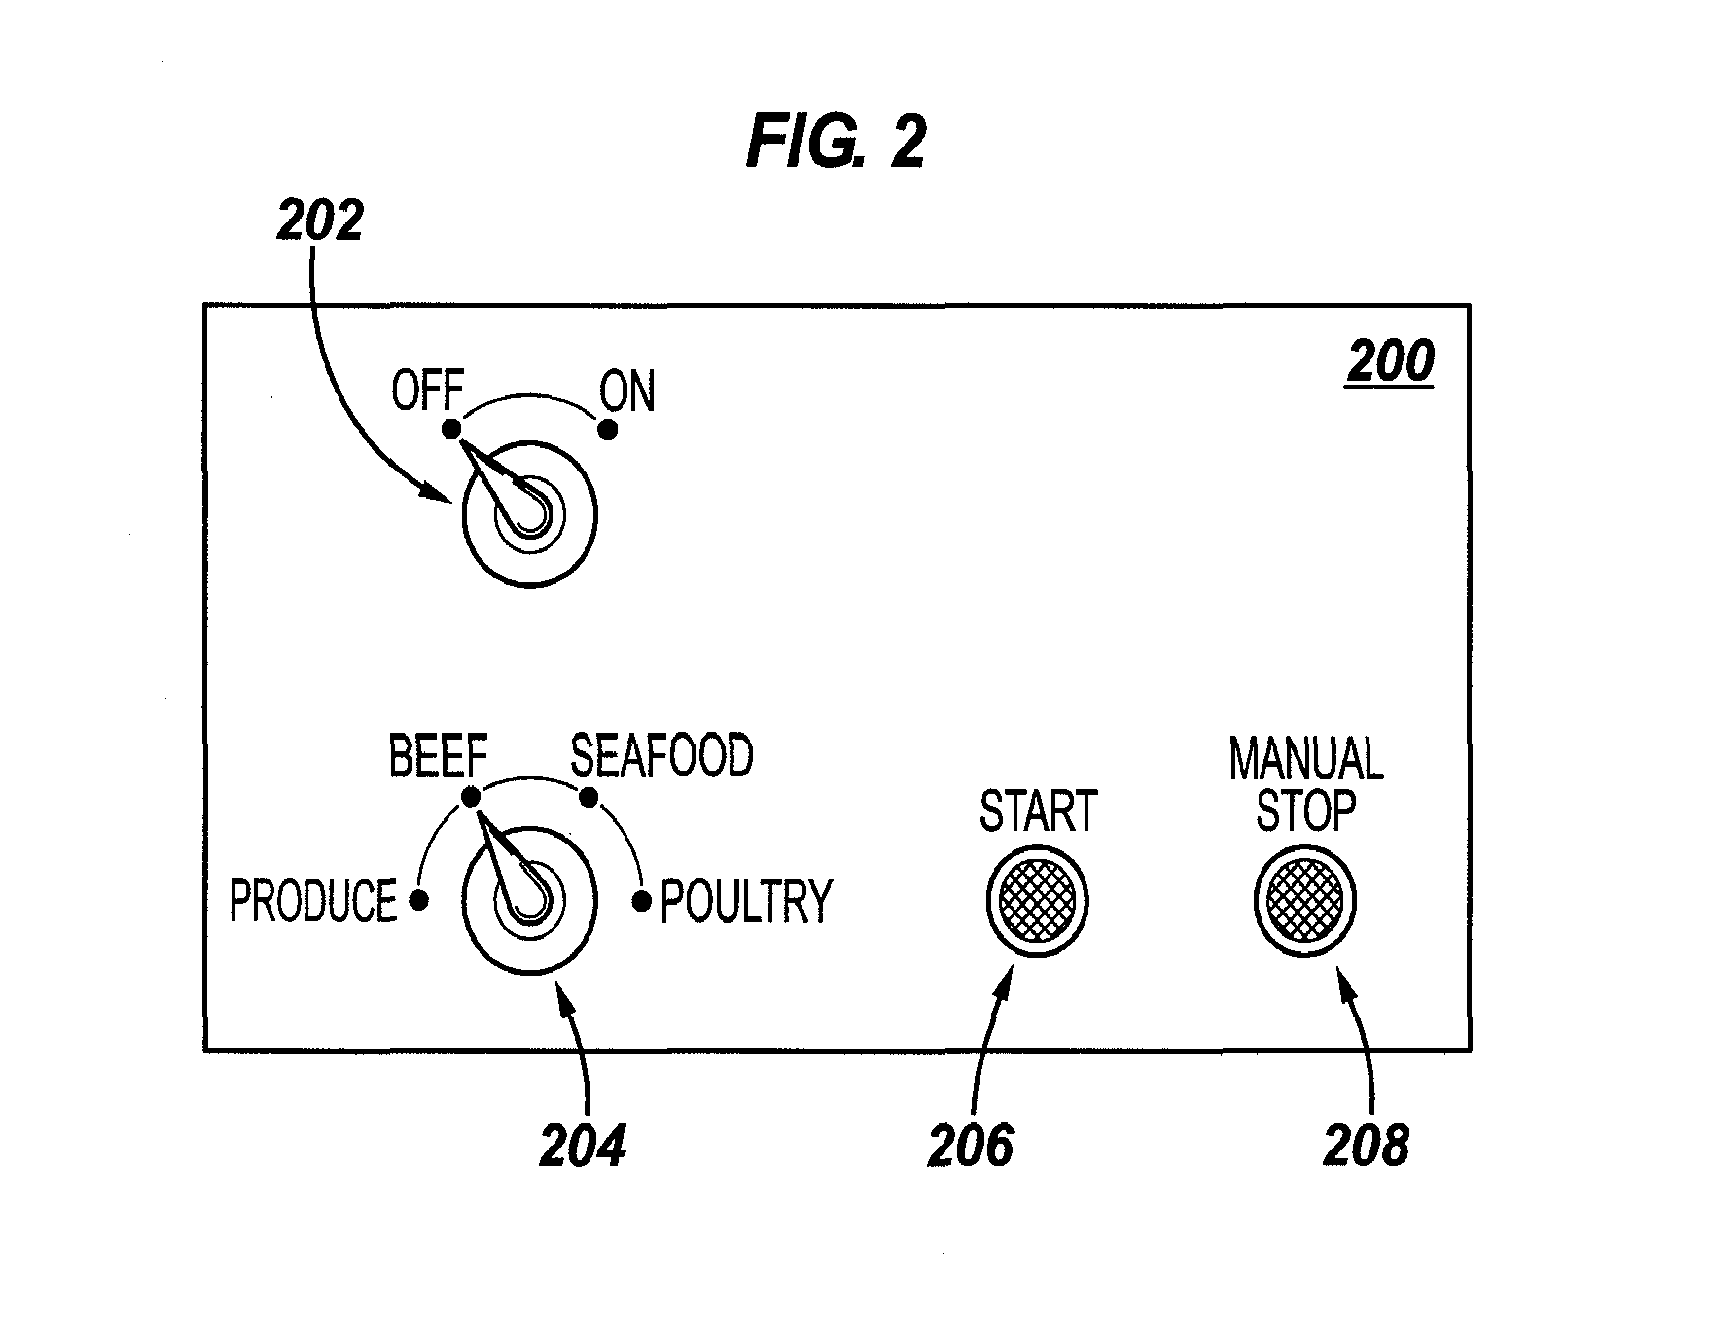 Method and apparatus for enhancing biological product safety, flavor, appearance and shelf-life